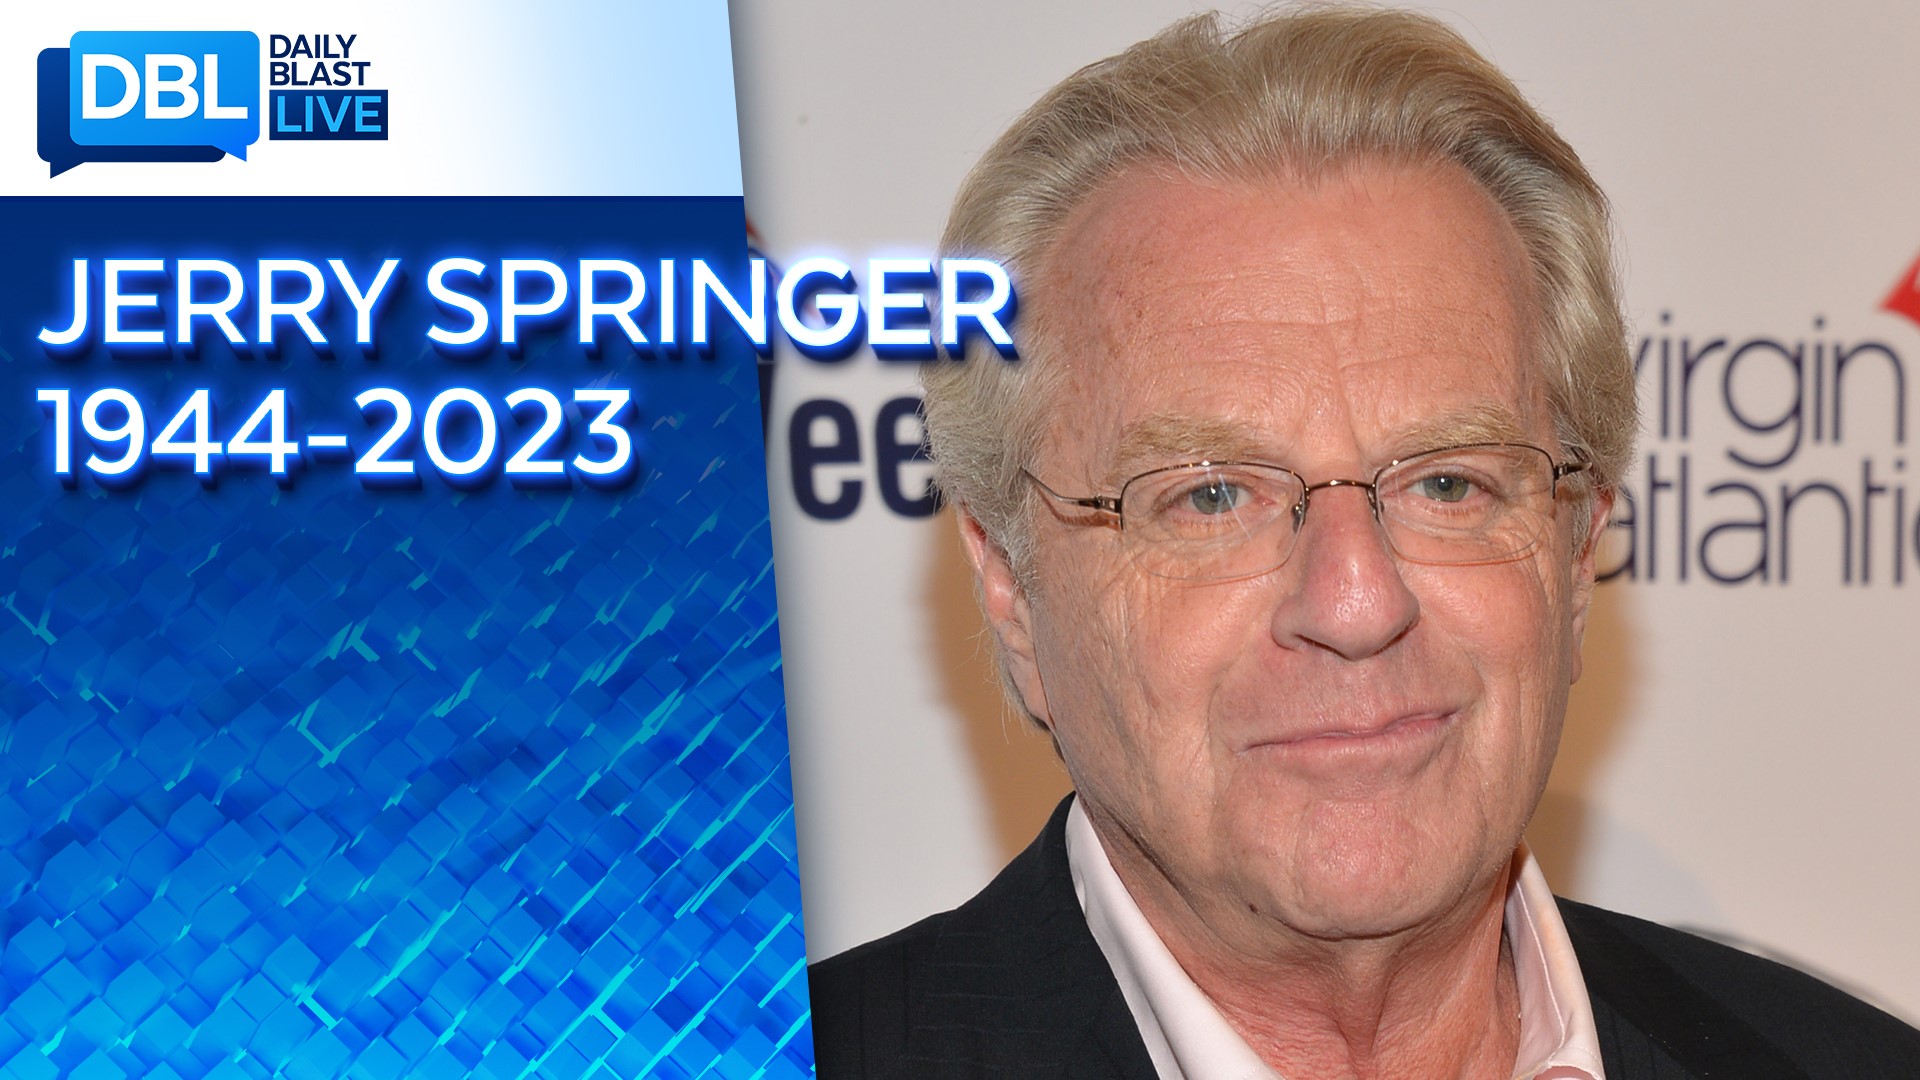 Legendary TV host and former Cincinnati mayor Jerry Springer, who helped kick off DBL's 6th season, passed away Thursday morning after a battle with cancer.